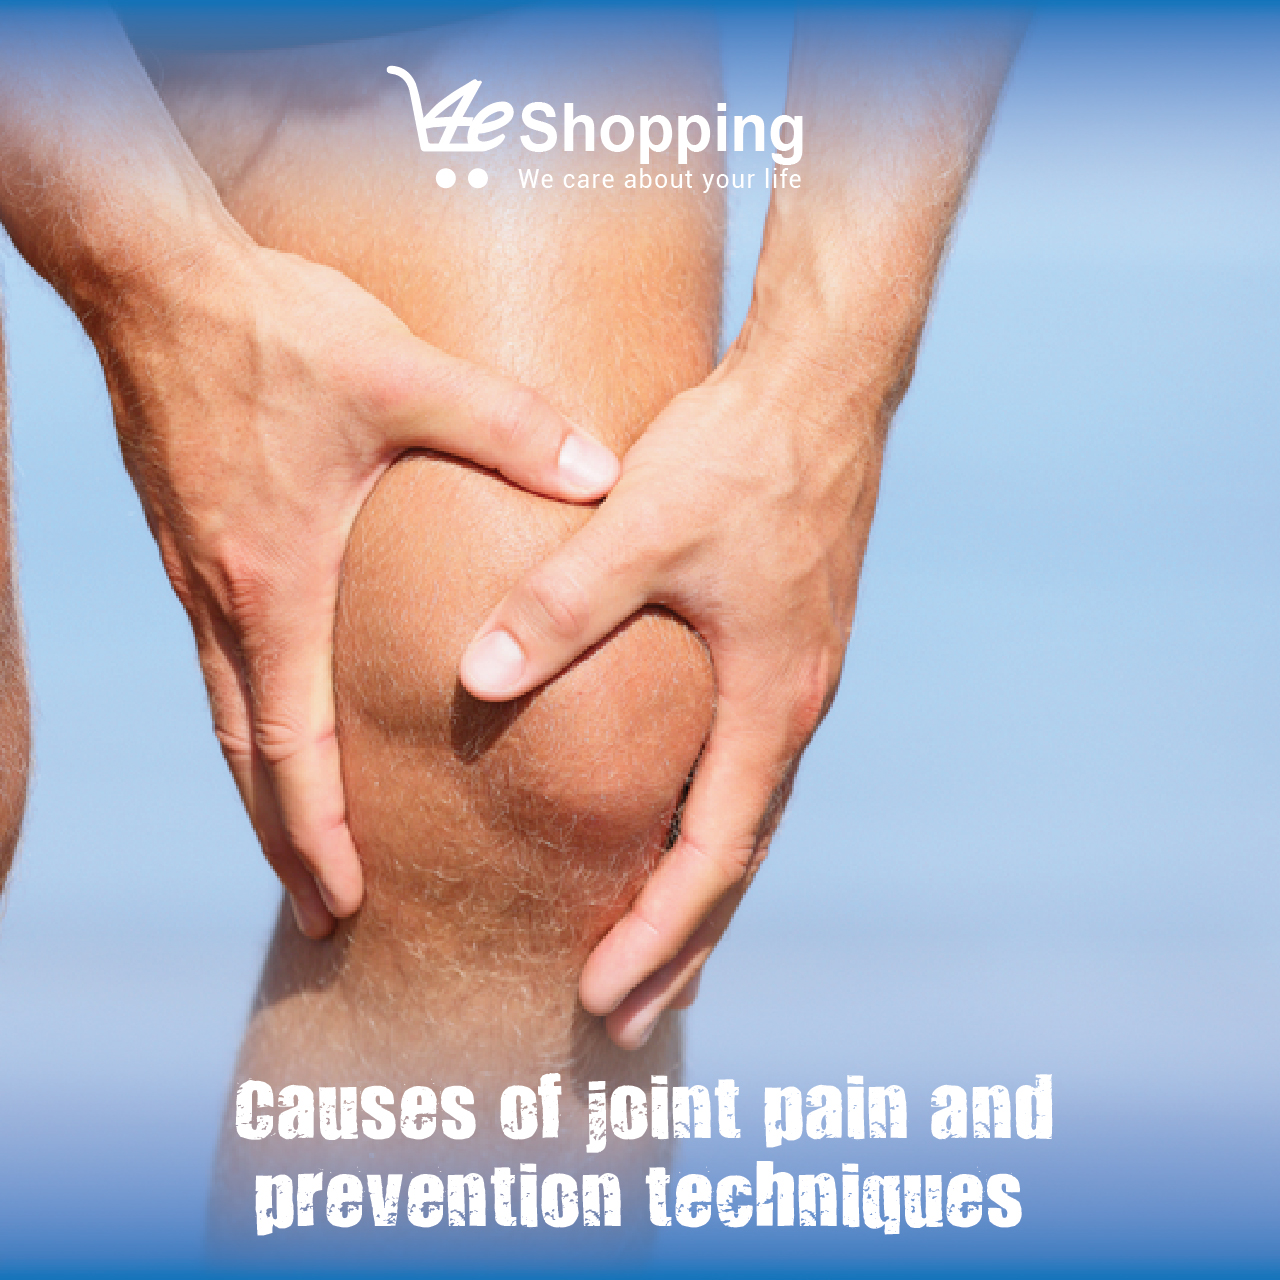 Causes of joint pain and ways of easing it